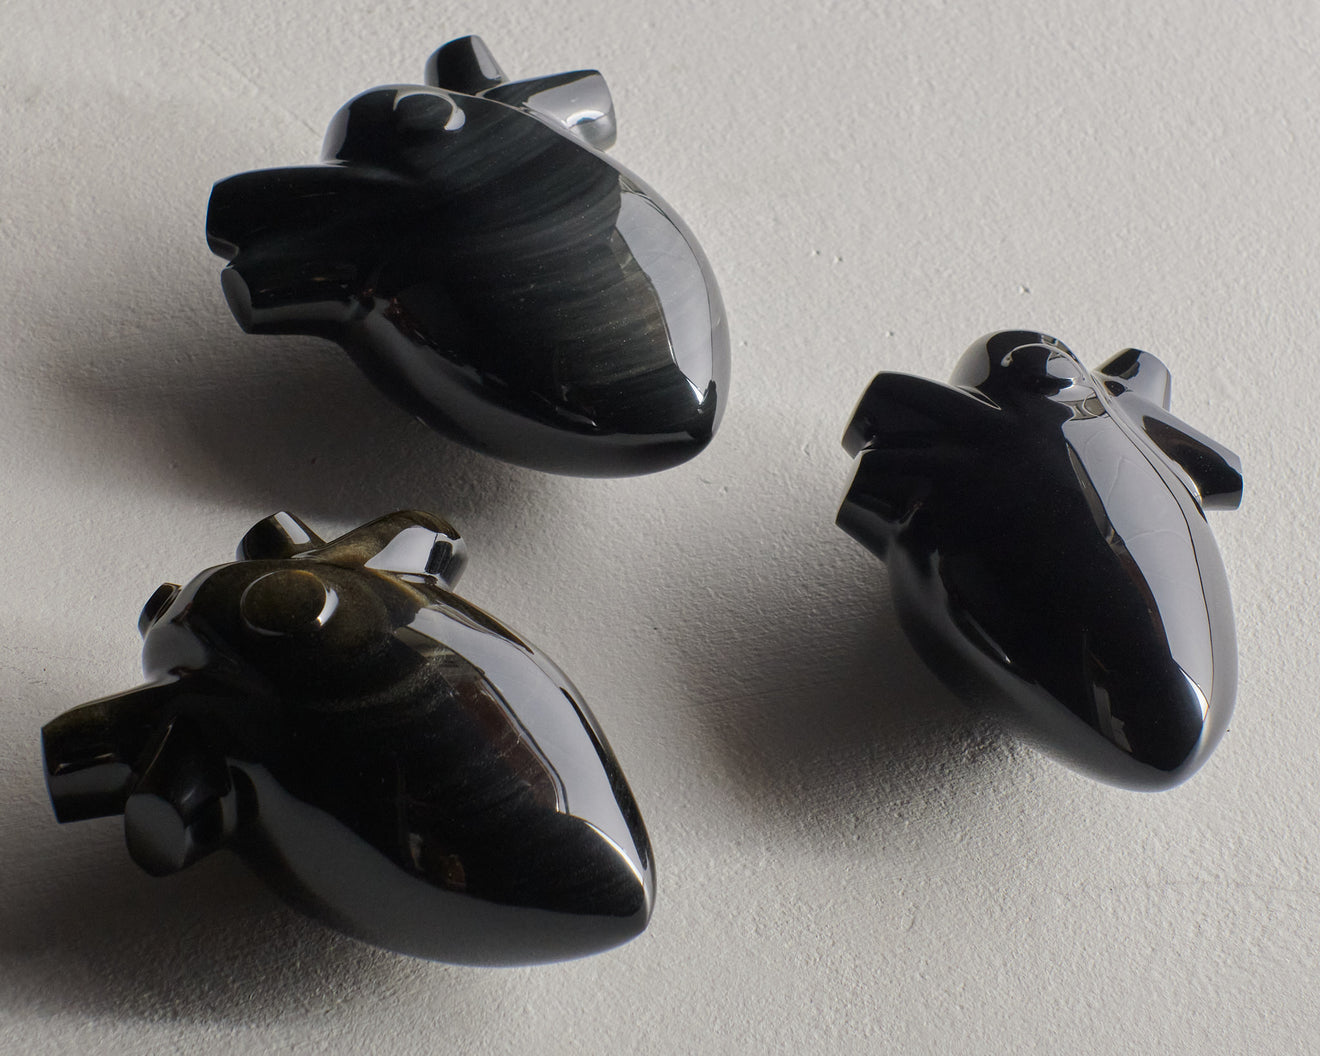 OBSIDIAN CARVED HEART(S), LARGE & SMALL